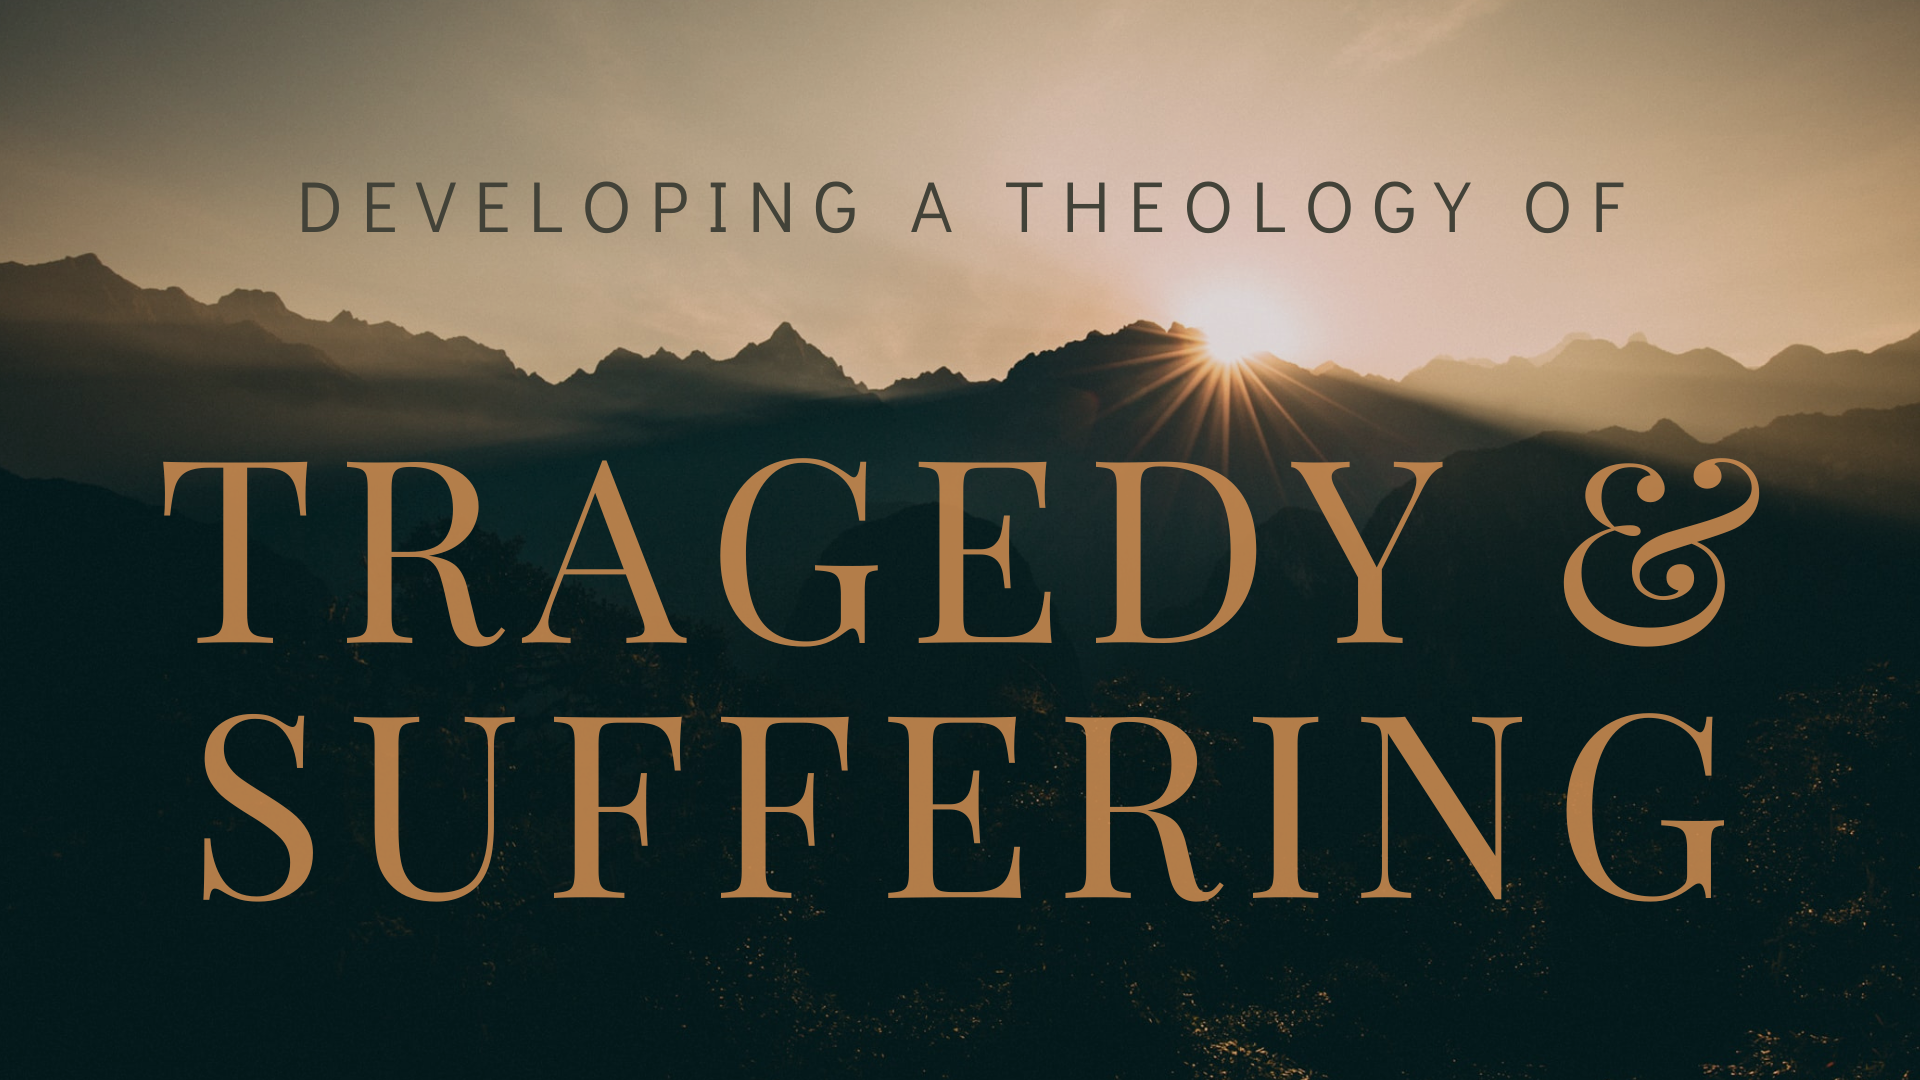 A Theology of Tragedy and Suffering Part 6